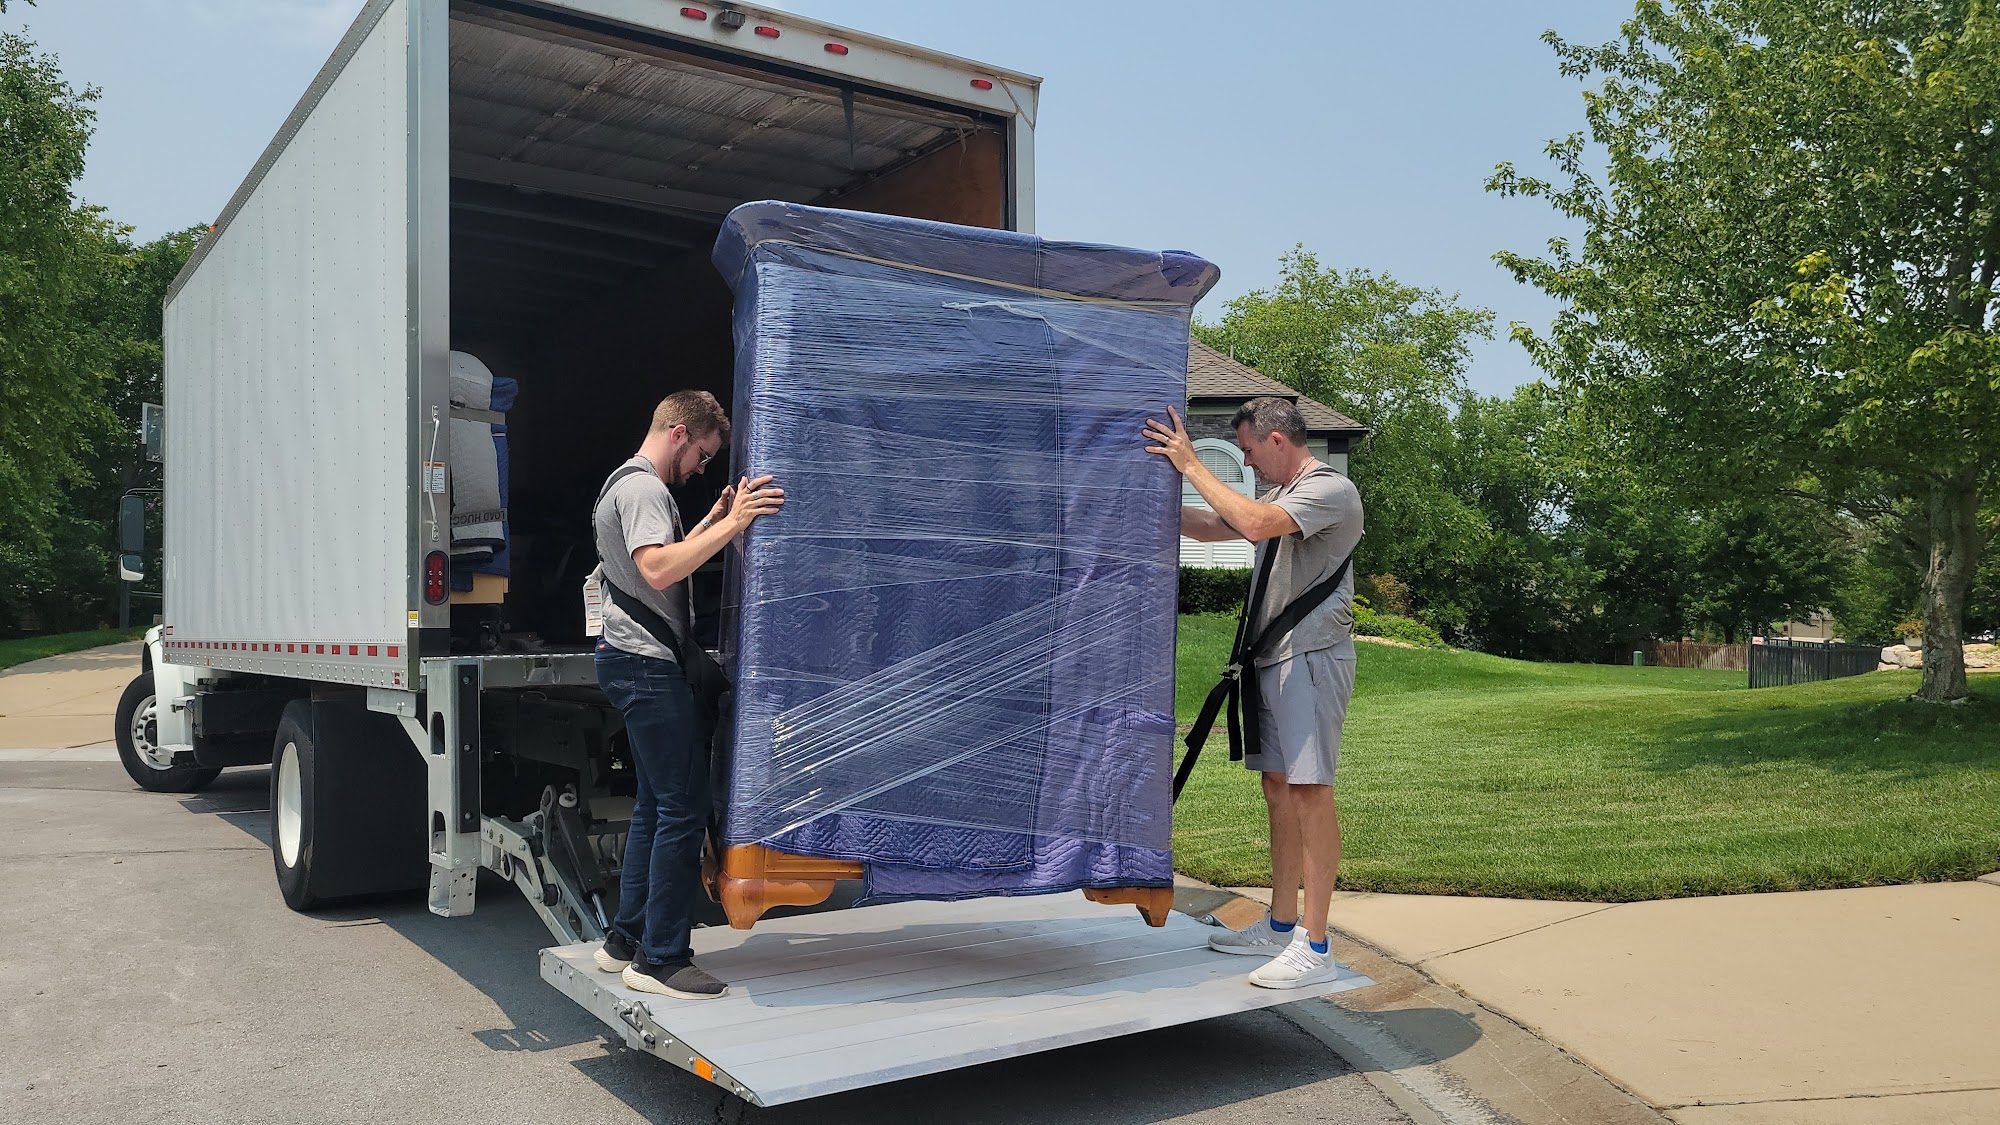 Platinum Movers KC - Professional Furniture Delivery 14216 W 157th Terrace, Olathe